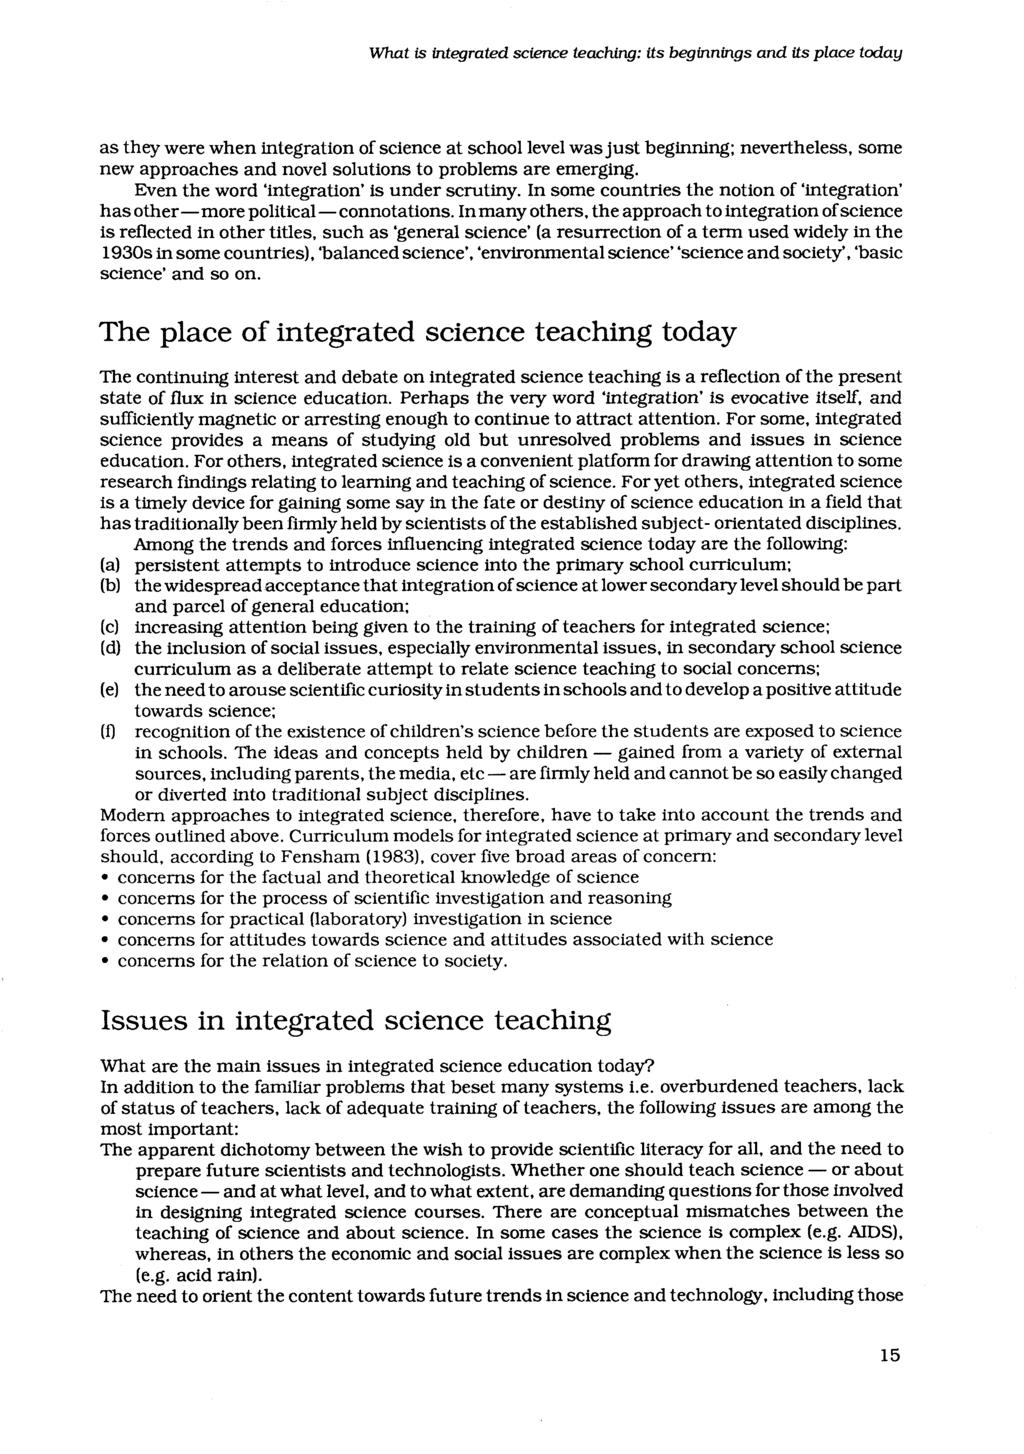 What is integrated science teaching: its beginnings and its place today as they were when integration of science at school level was just beginning: nevertheless, some new approaches and novel